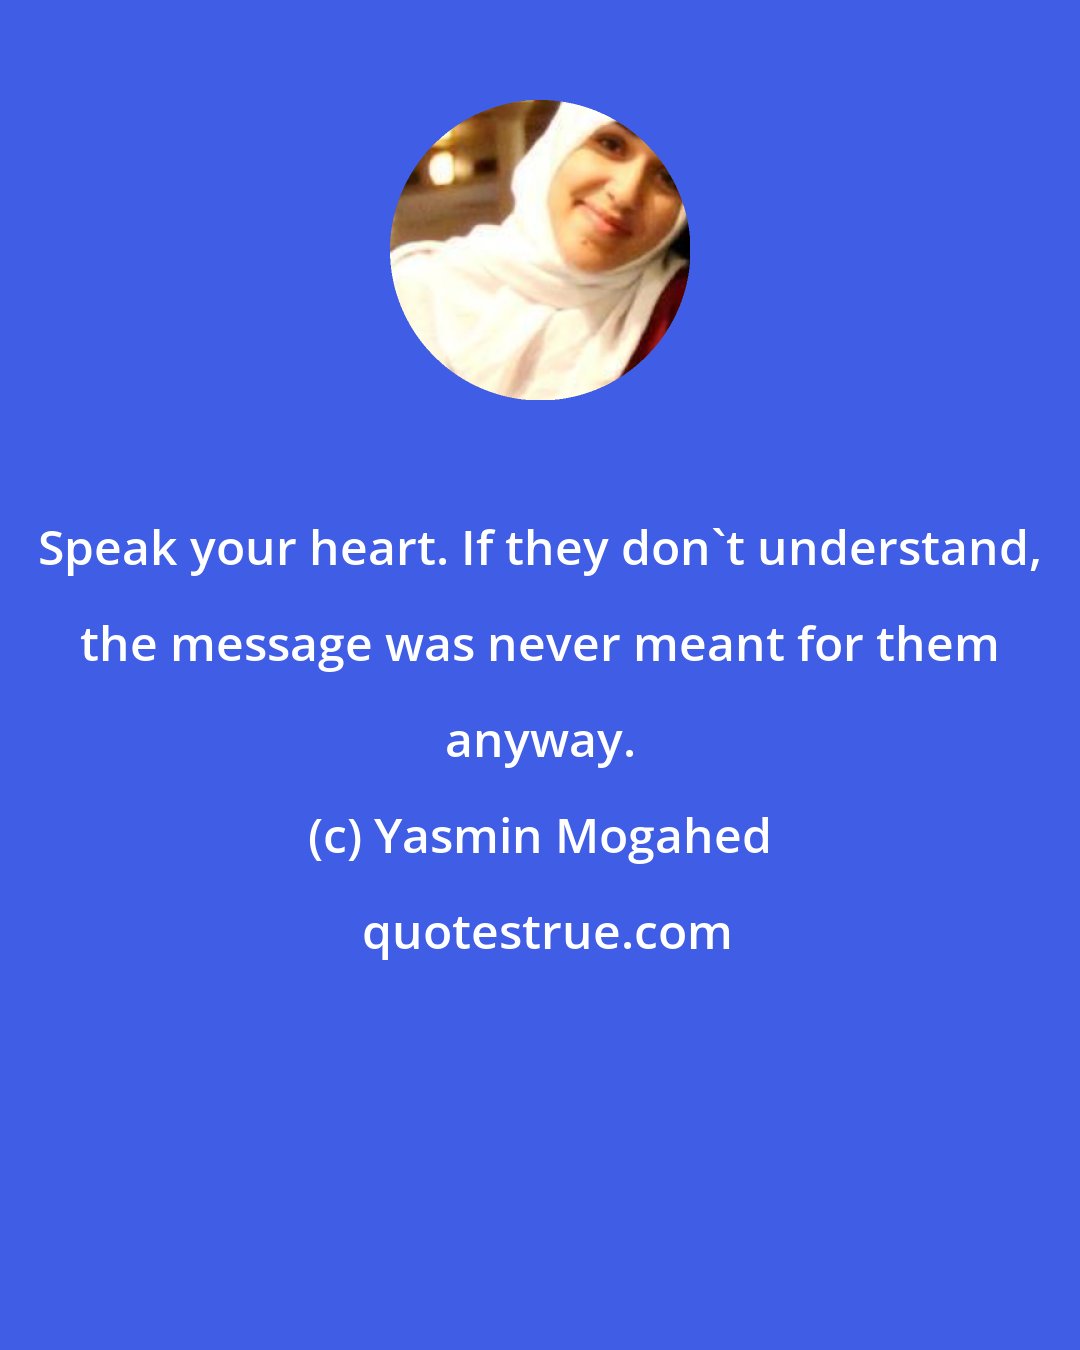 Yasmin Mogahed: Speak your heart. If they don't understand, the message was never meant for them anyway.